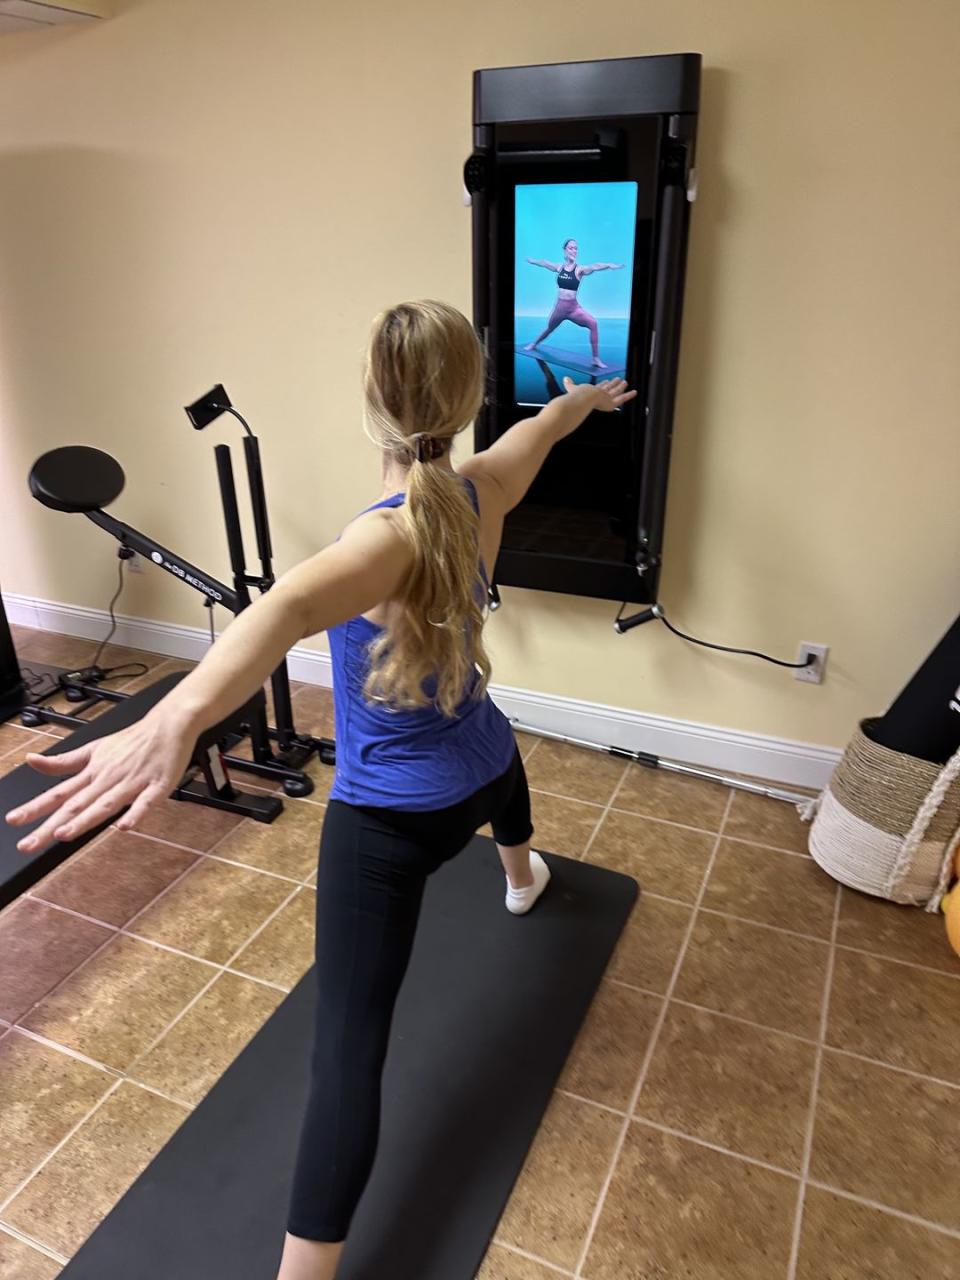 These Smart Fitness Mirrors Put Hundreds of Home Workout Classes at Your Fingertips